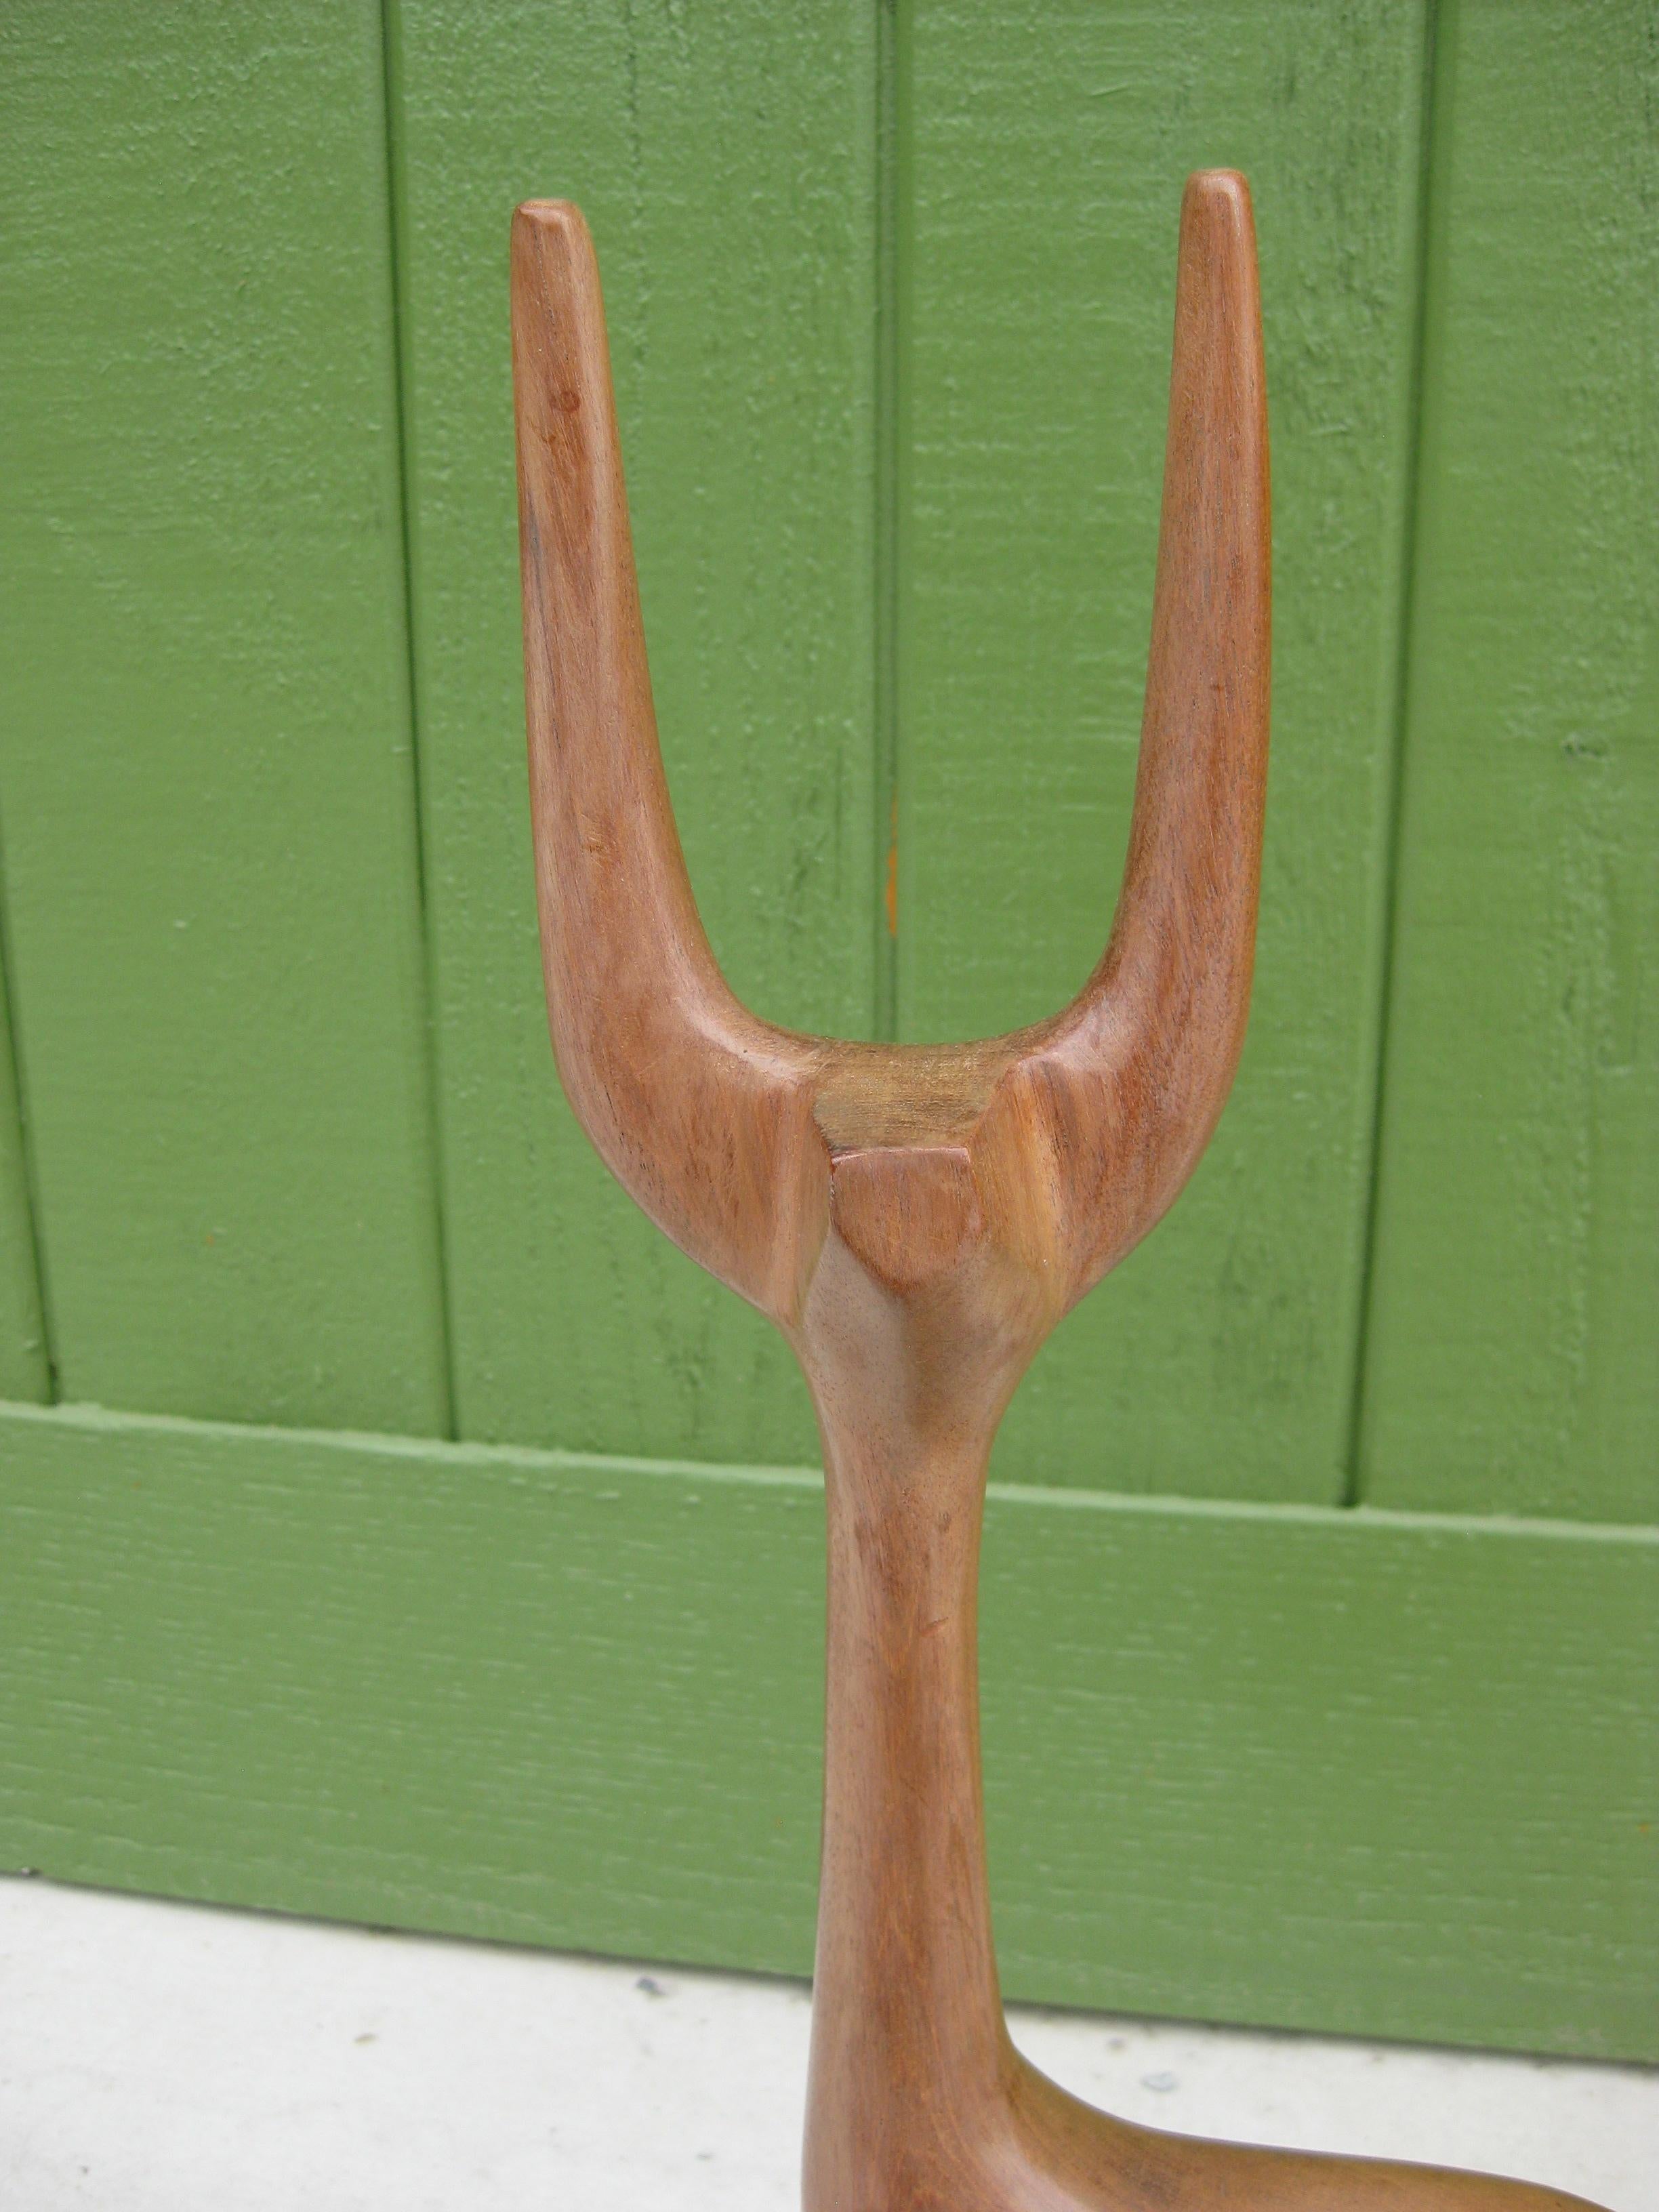 We are offering a wonderful hand carved wood animal sculpture by Mexican artist, J.G. Casas, circa 1960's. The sculpture has the original JOM Calidad, Mexico tag on the bottom. Great abstract design and form. Appears to be a deer, pronghorn or